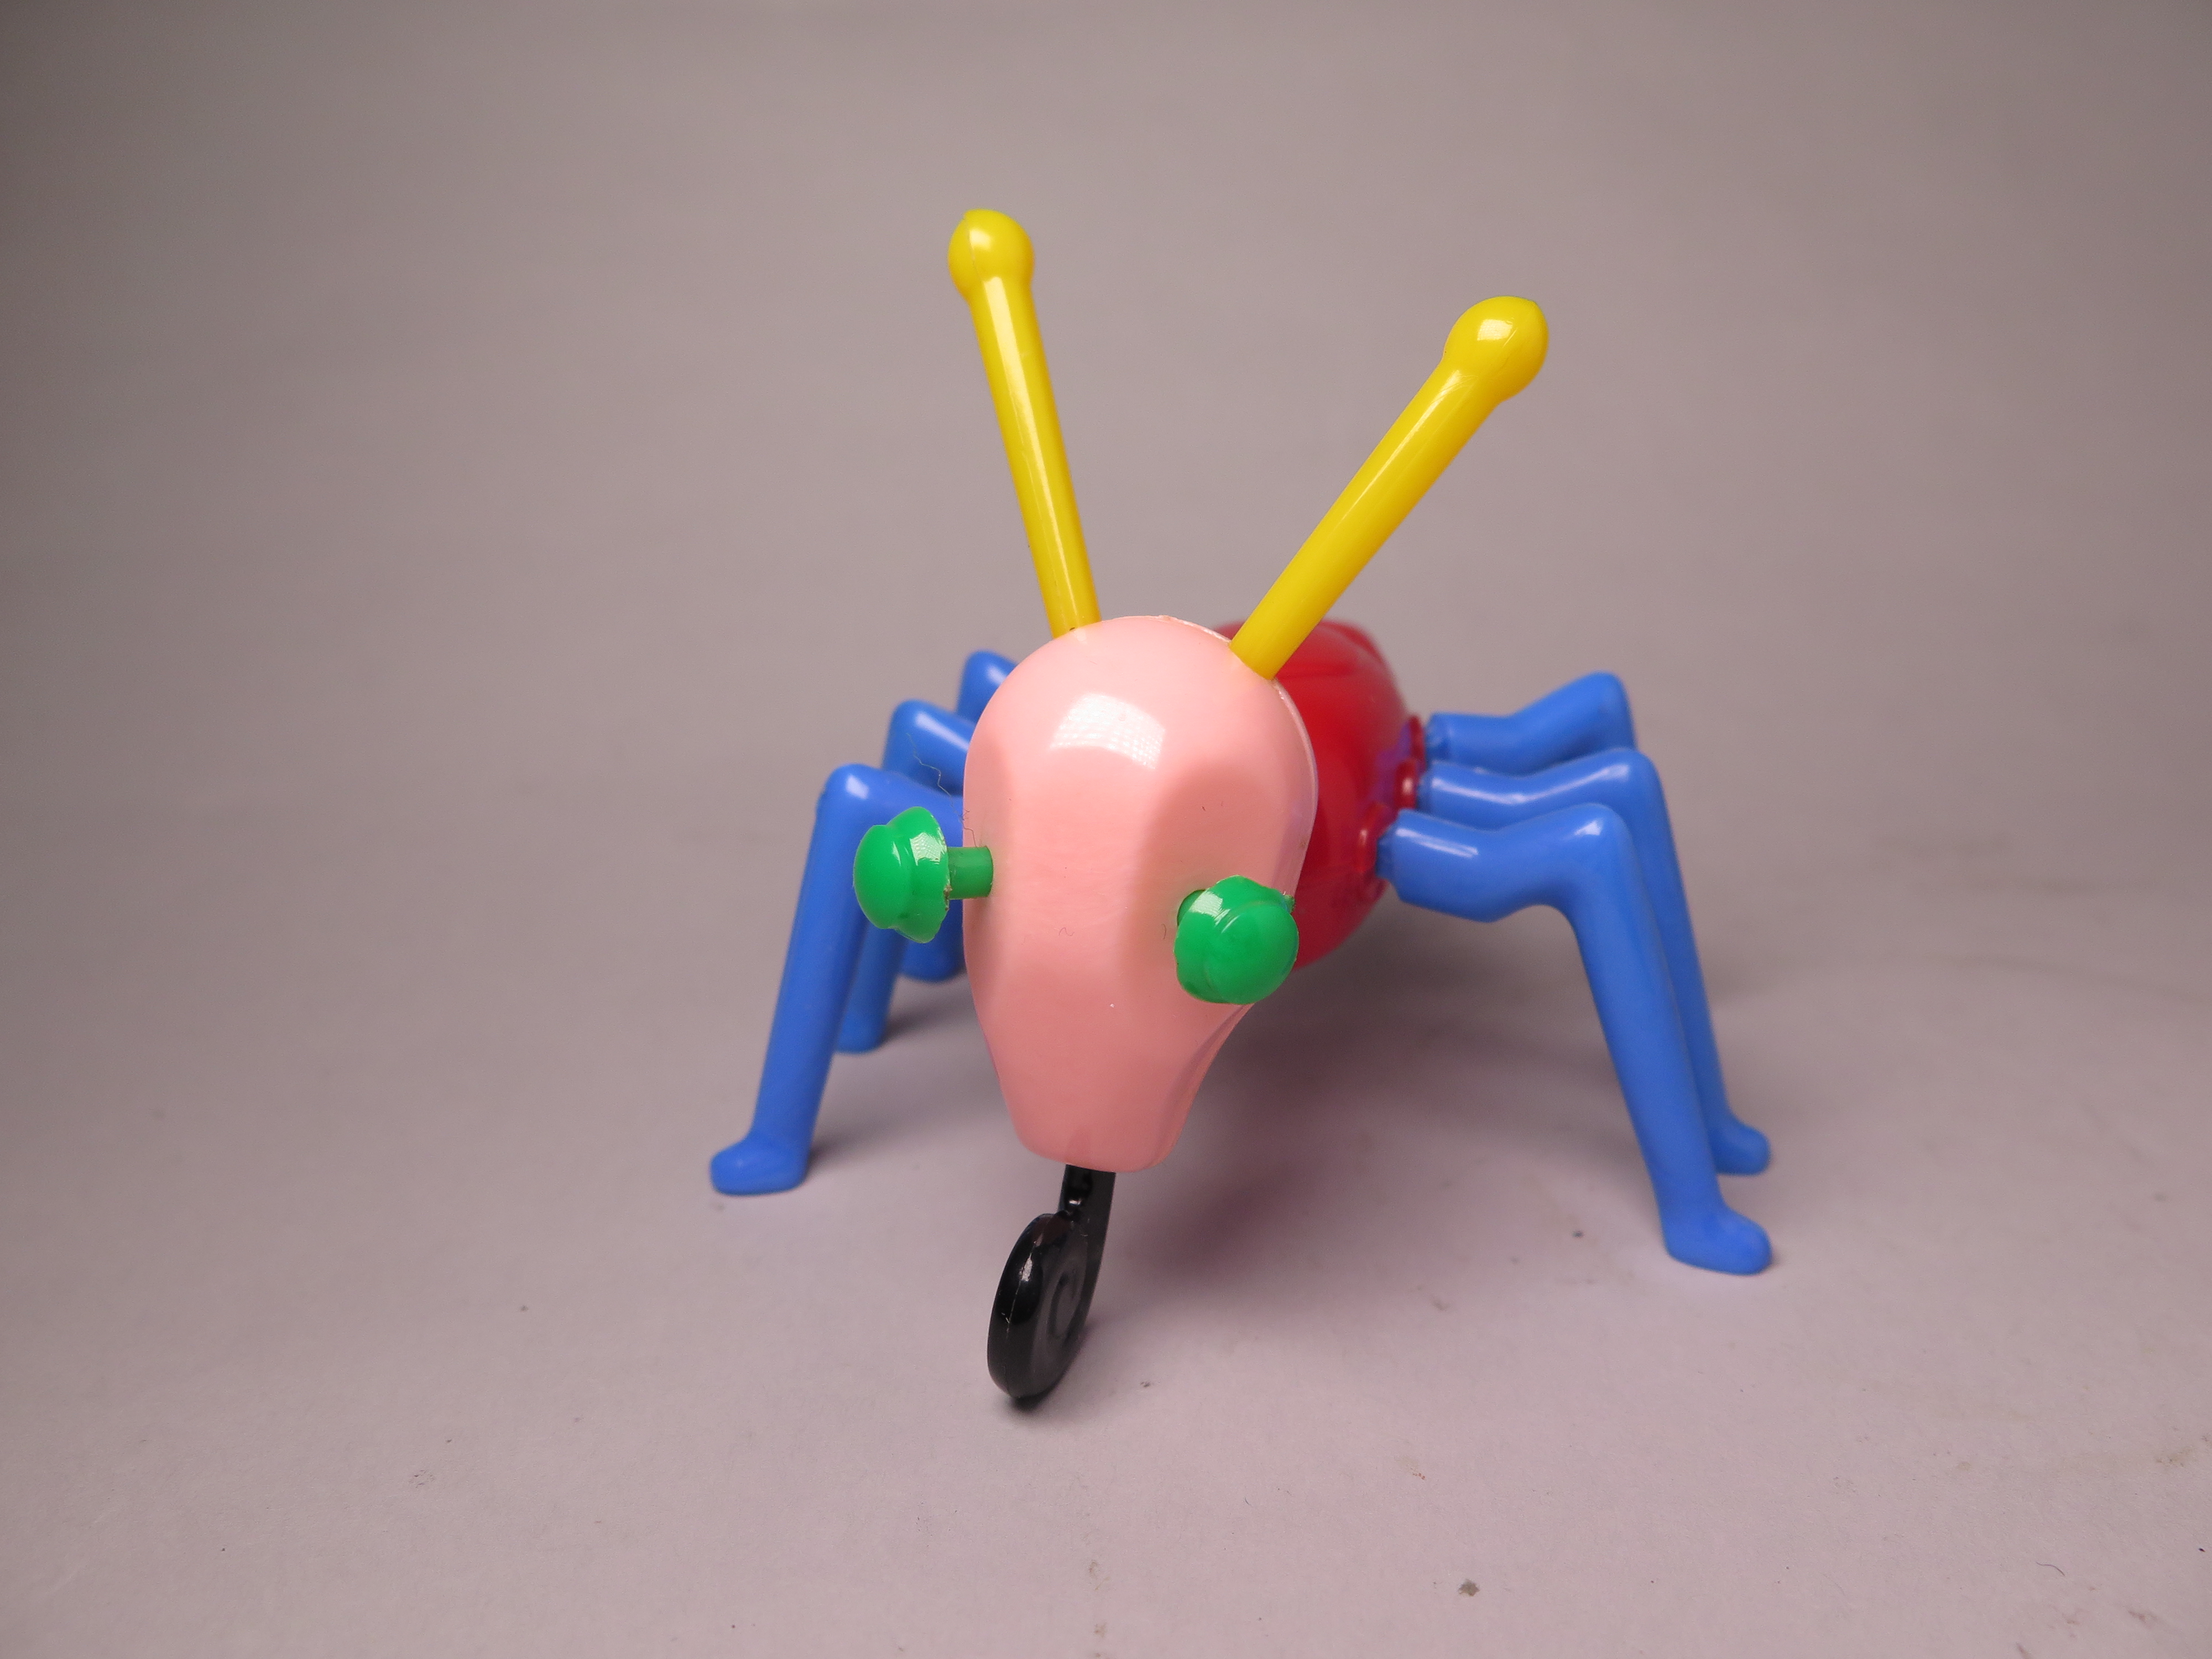 #1504 Plastic "Cootie" Bug from U.S.A., circa 1930s - 1940s **SOLD** September 2017